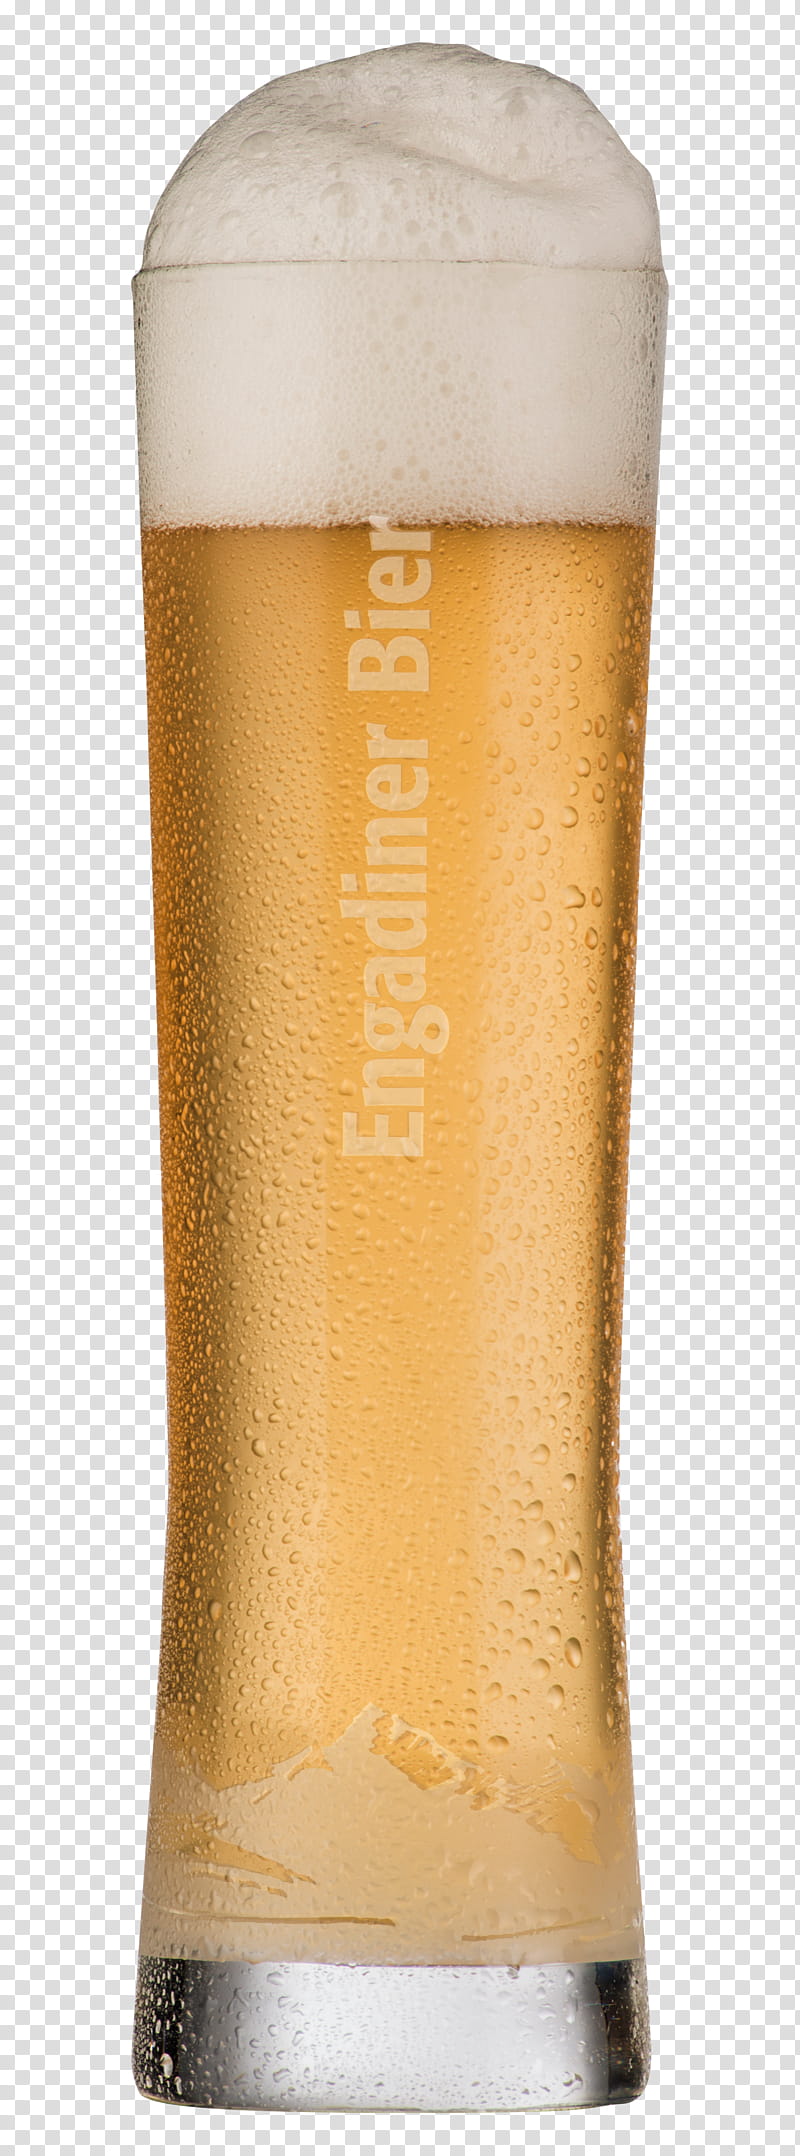 Beer, Wheat Beer, Pint Glass, Imperial Pint, Brewery, Beer Glasses, Blue, Portrait transparent background PNG clipart